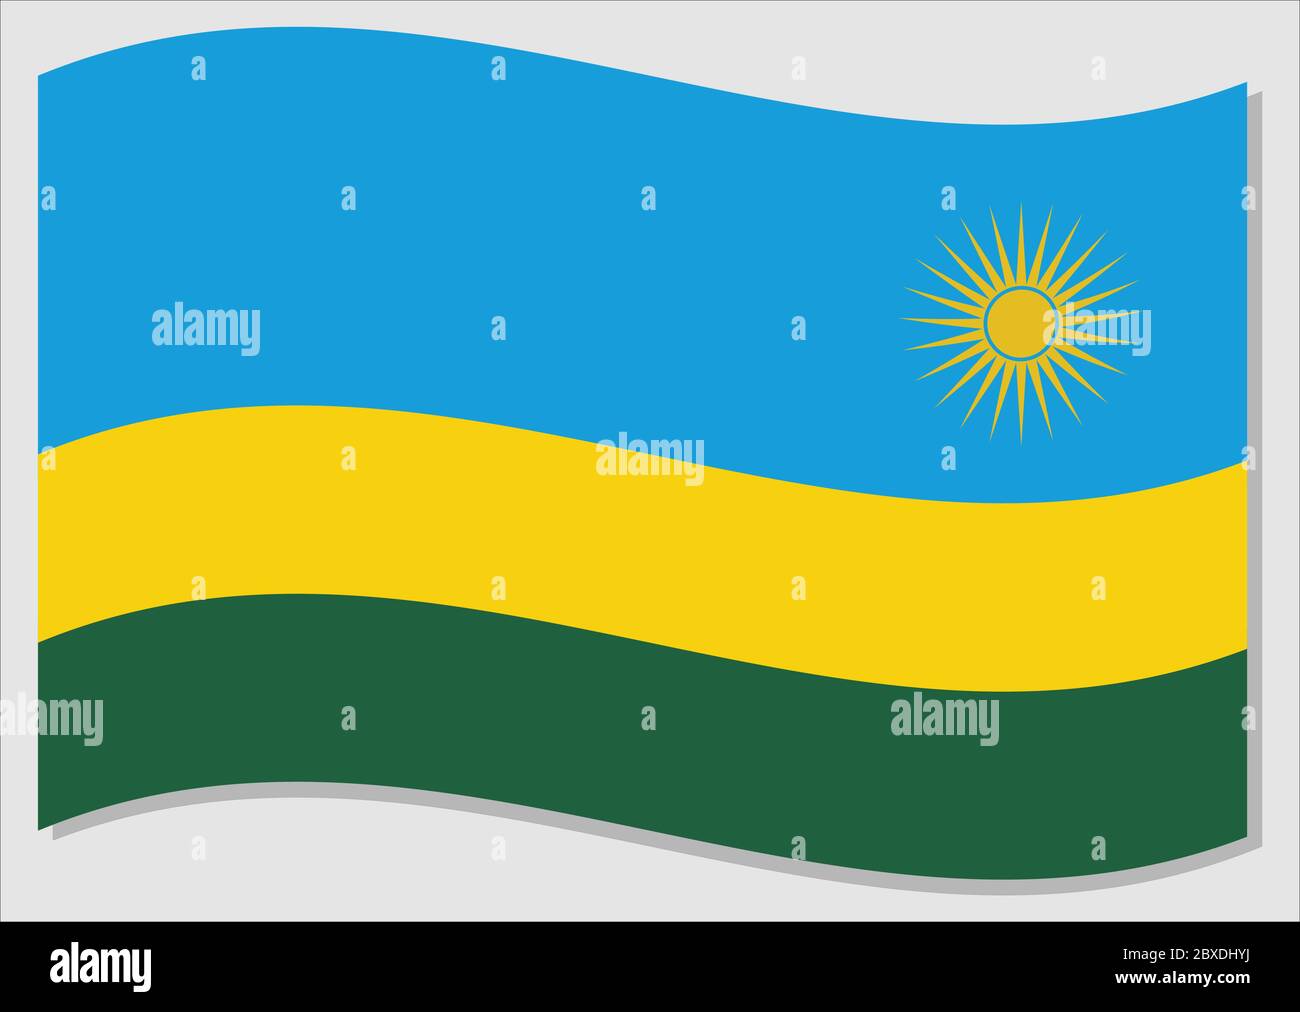 Waving flag of Rwanda vector graphic. Waving Rwandese flag illustration. Rwanda country flag wavin in the wind is a symbol of freedom and independence Stock Vector